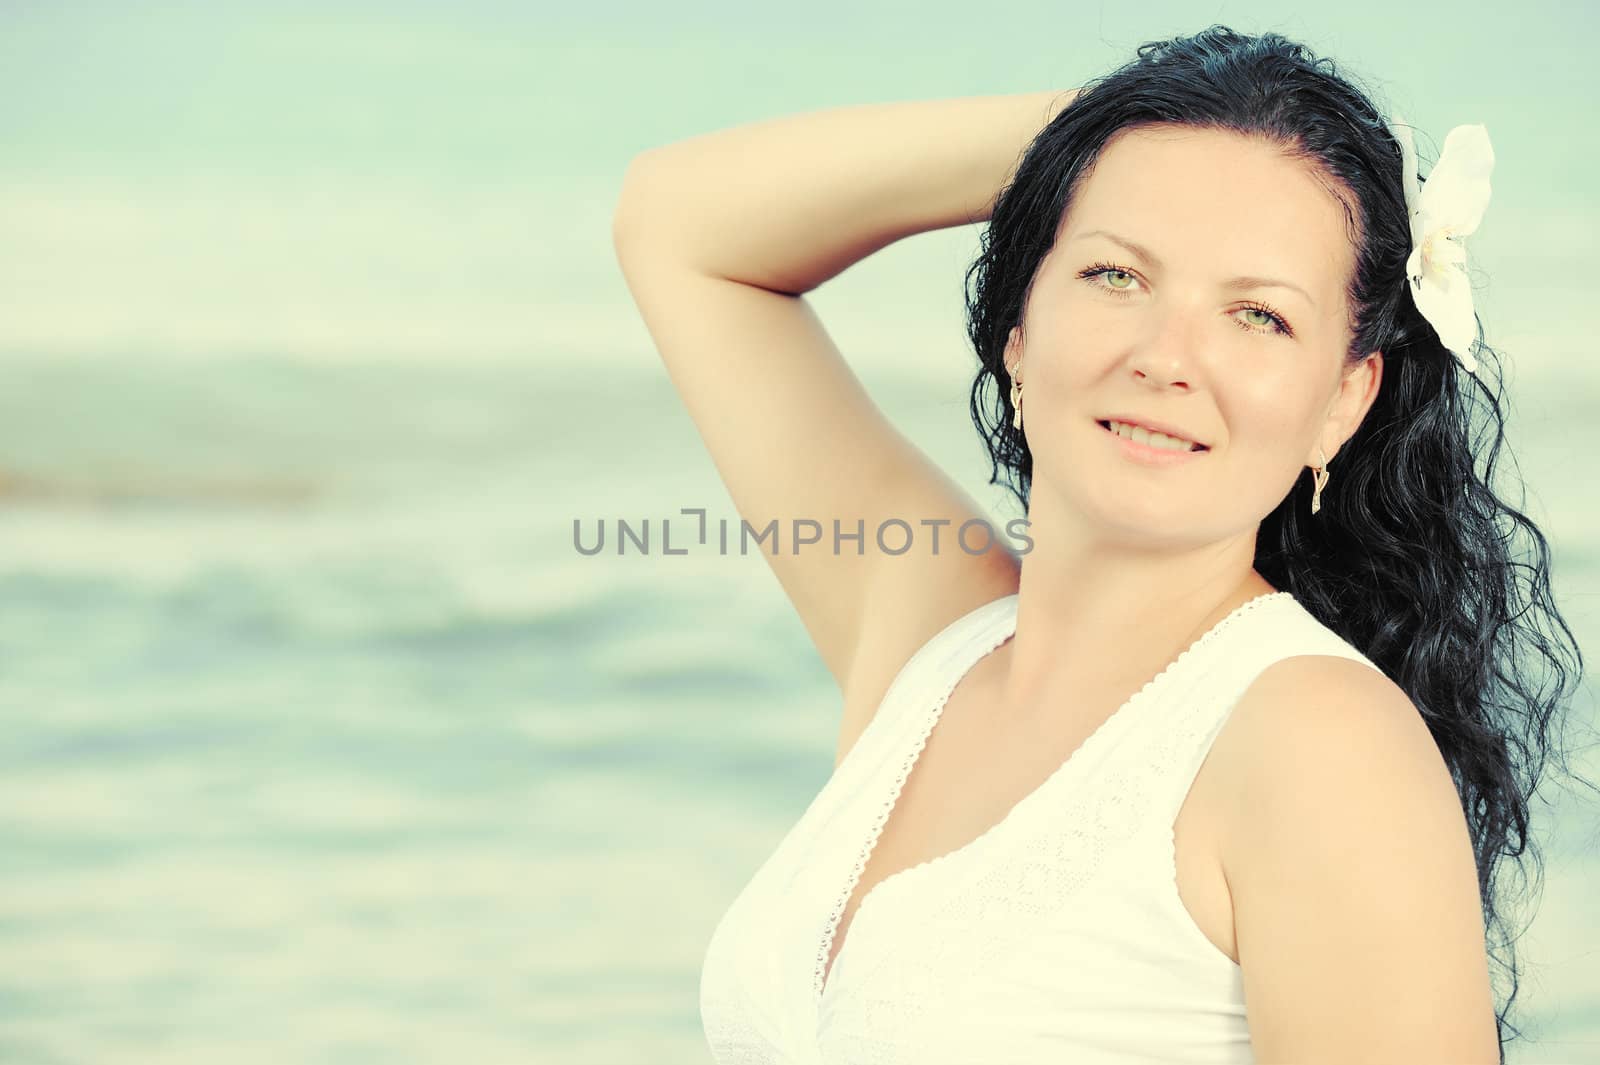 The woman in a white sundress on seacoast. Warm toned image